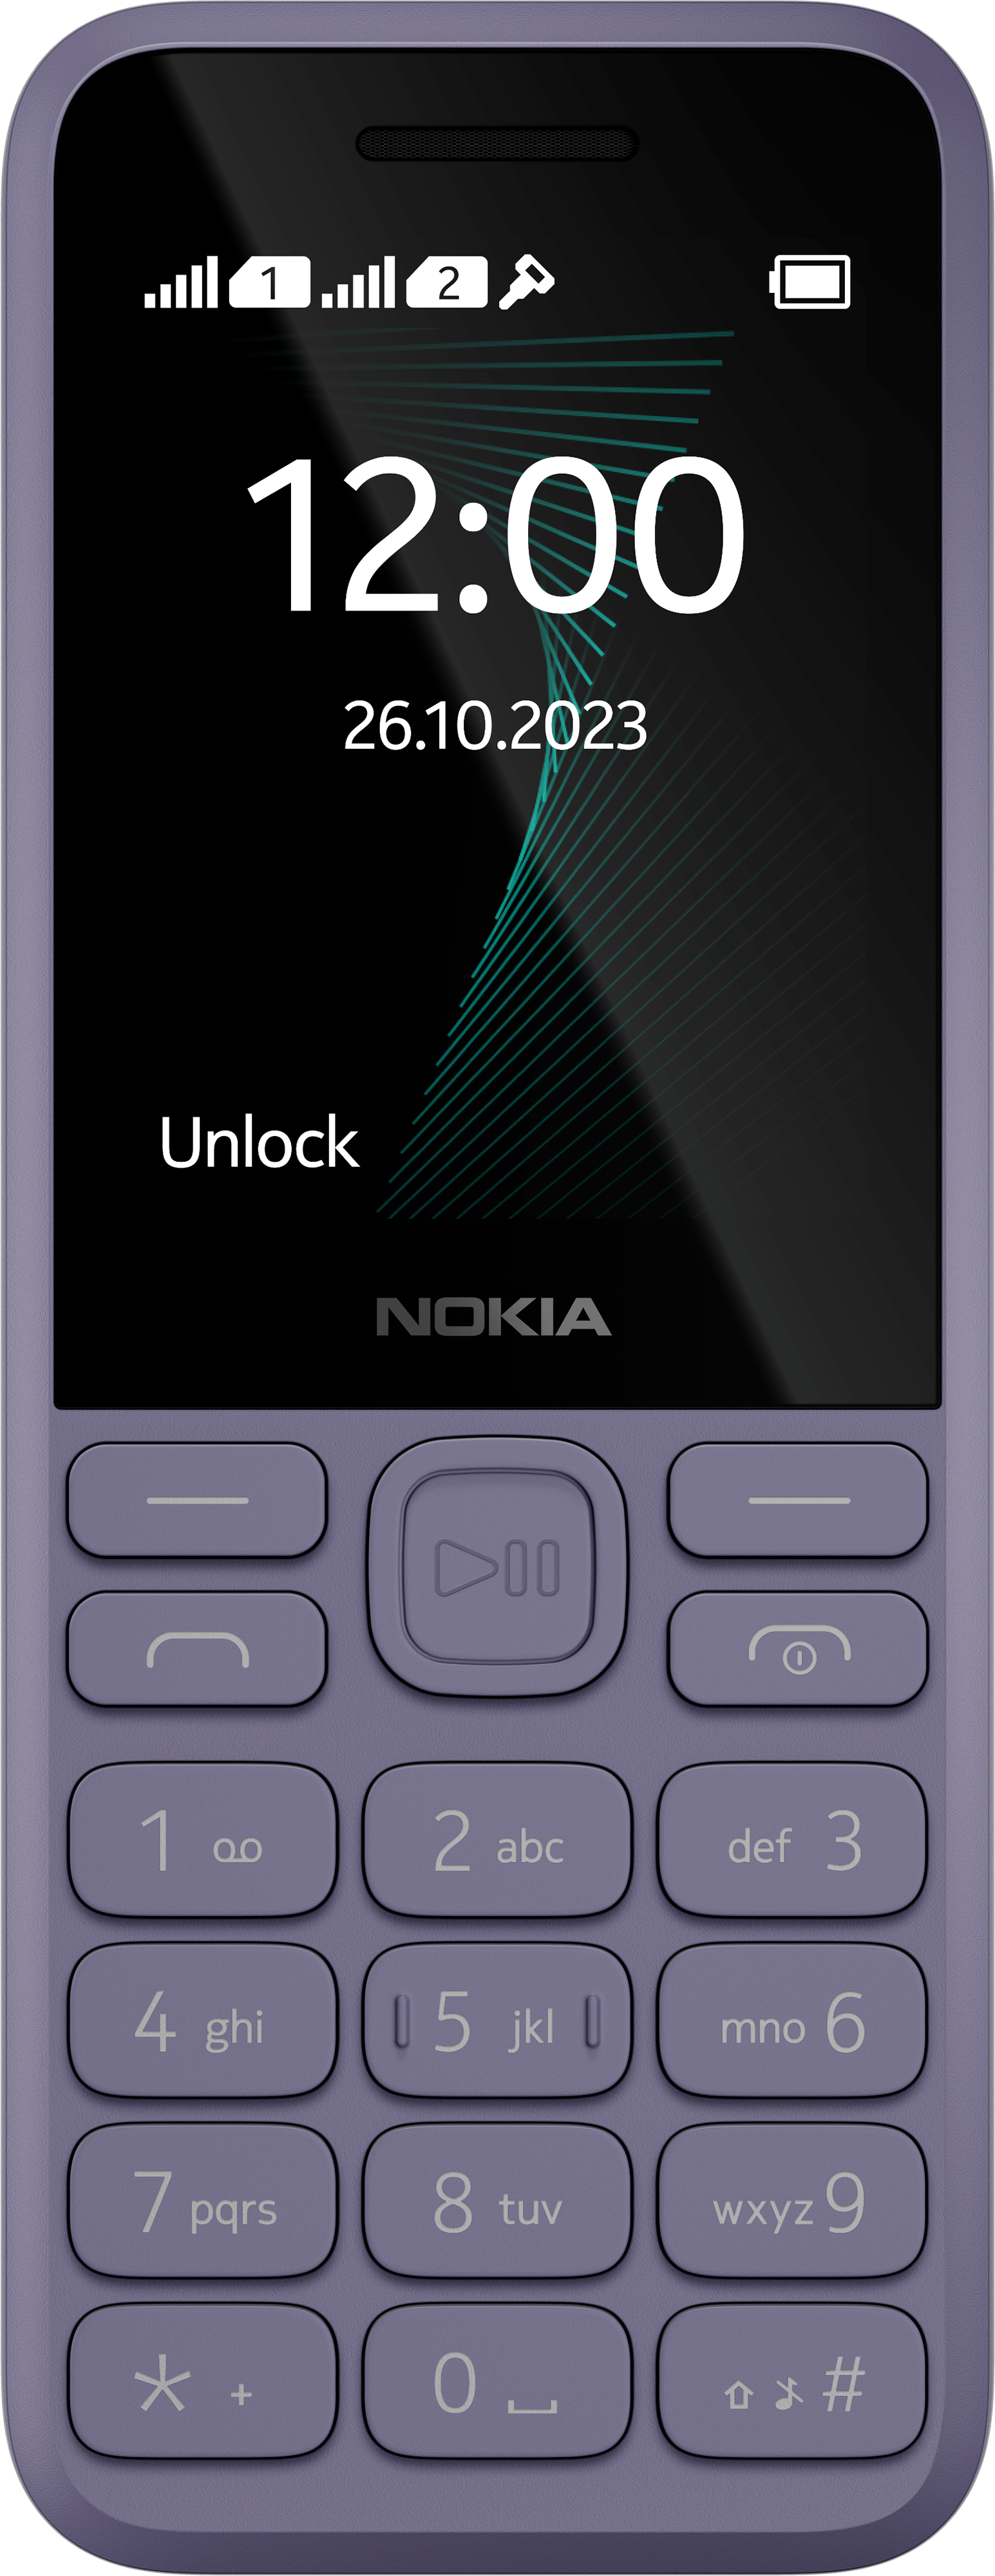 nokia android phone 2022